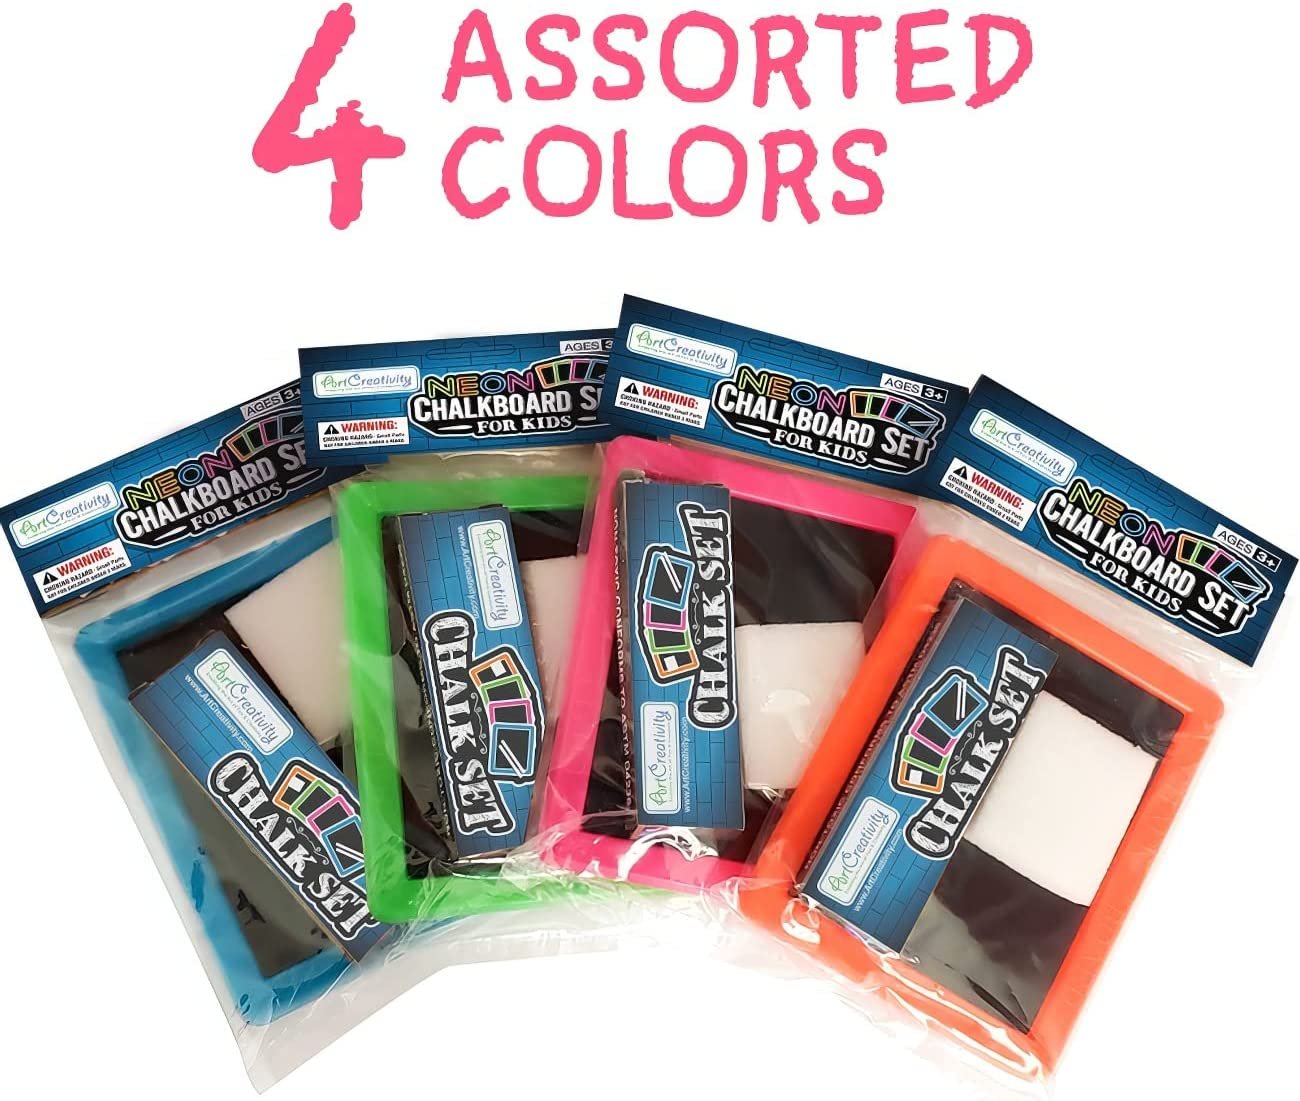 Neon Chalkboard Set for Kids - 12 Kits - 1 Mini Chalk Board, 2 Chalk Sticks, and 1 Eraser Per Kit - Art Birthday Party Favors for Boys and Girls, Unique Stationery Goodie Bag Fillers